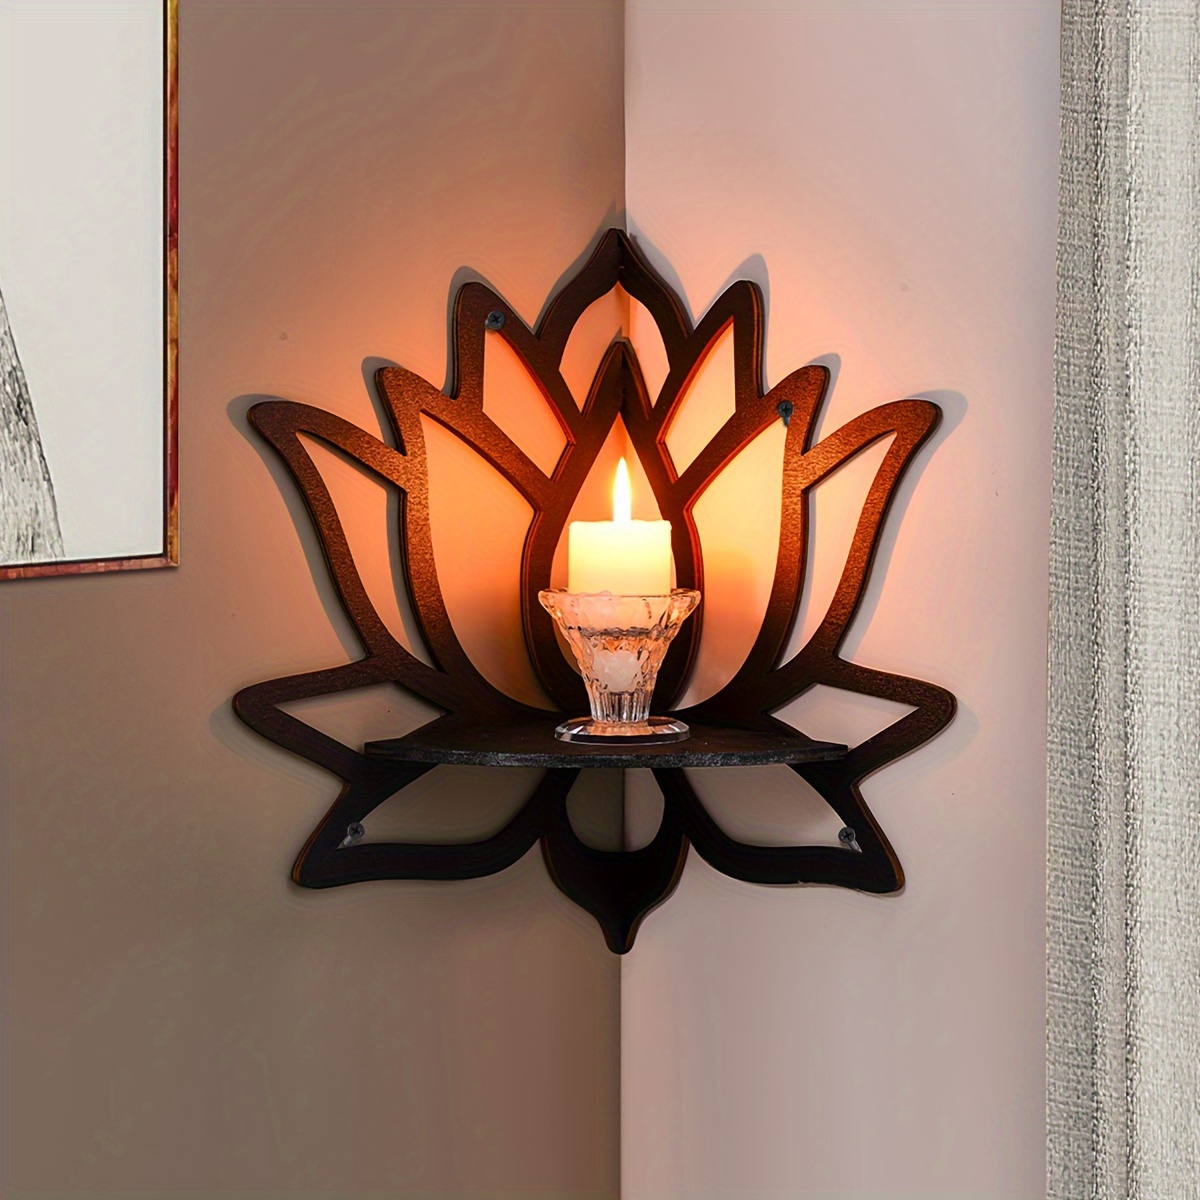 

1pc Creative Simple Lotus Shaped Corner Rack Shelf, Wall Lotus Shaped Shelf Display Rack, Wooden Wall Decoration Pendant Candle Holder Decoration Dividers, Home Black Lotus Festival Wall Decorations